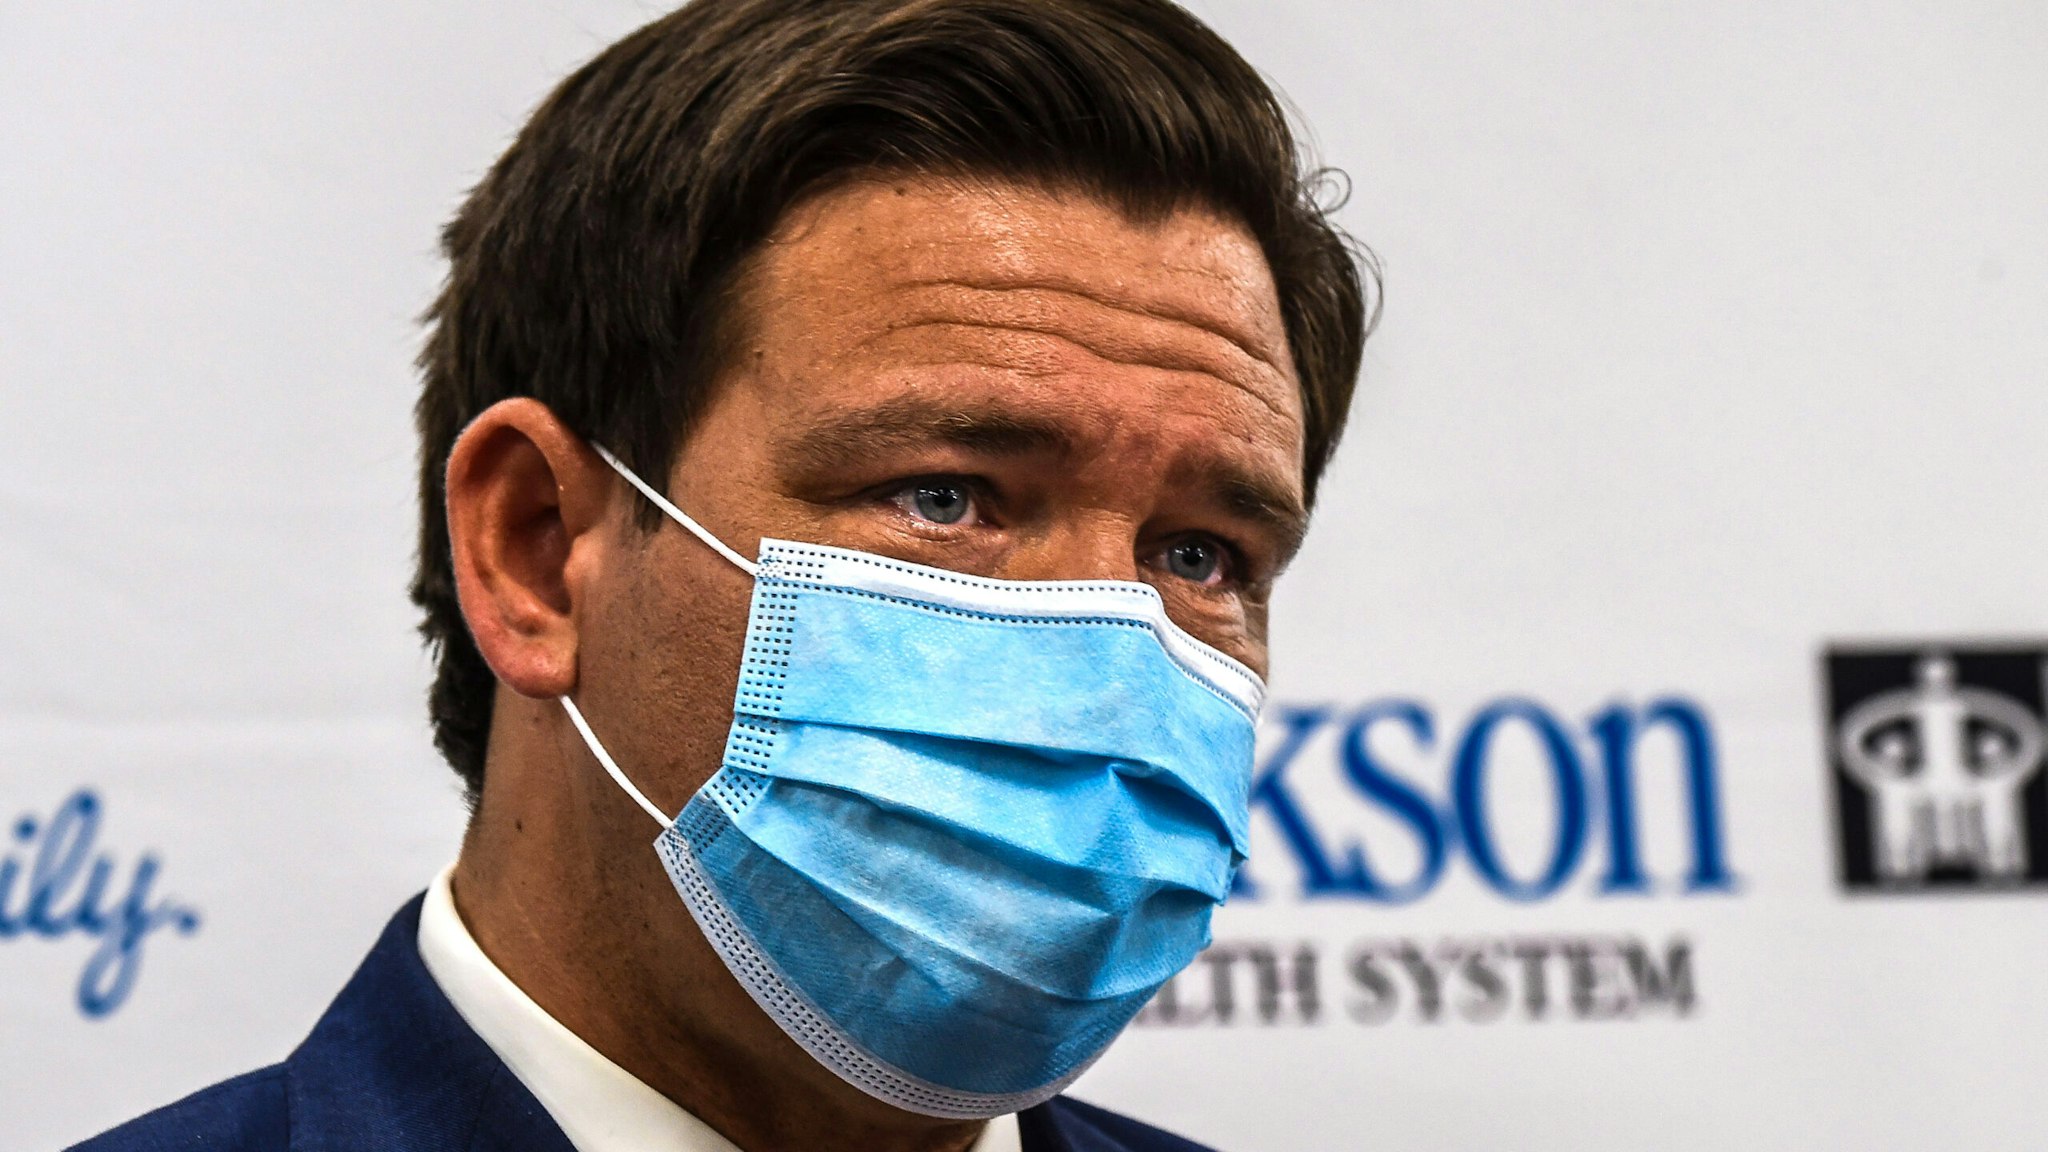 Florida Gov. Ron DeSantis wears a facemask during a press conference to address the rise of coronavirus cases in the state, at Jackson Memorial Hospital in Miami, on July 13, 2020. - Virus epicenter Florida saw 12,624 new cases on July 12 -- the second highest daily count recorded by any state, after its own record of 15,300 new COVID-19 cases a day earlier.